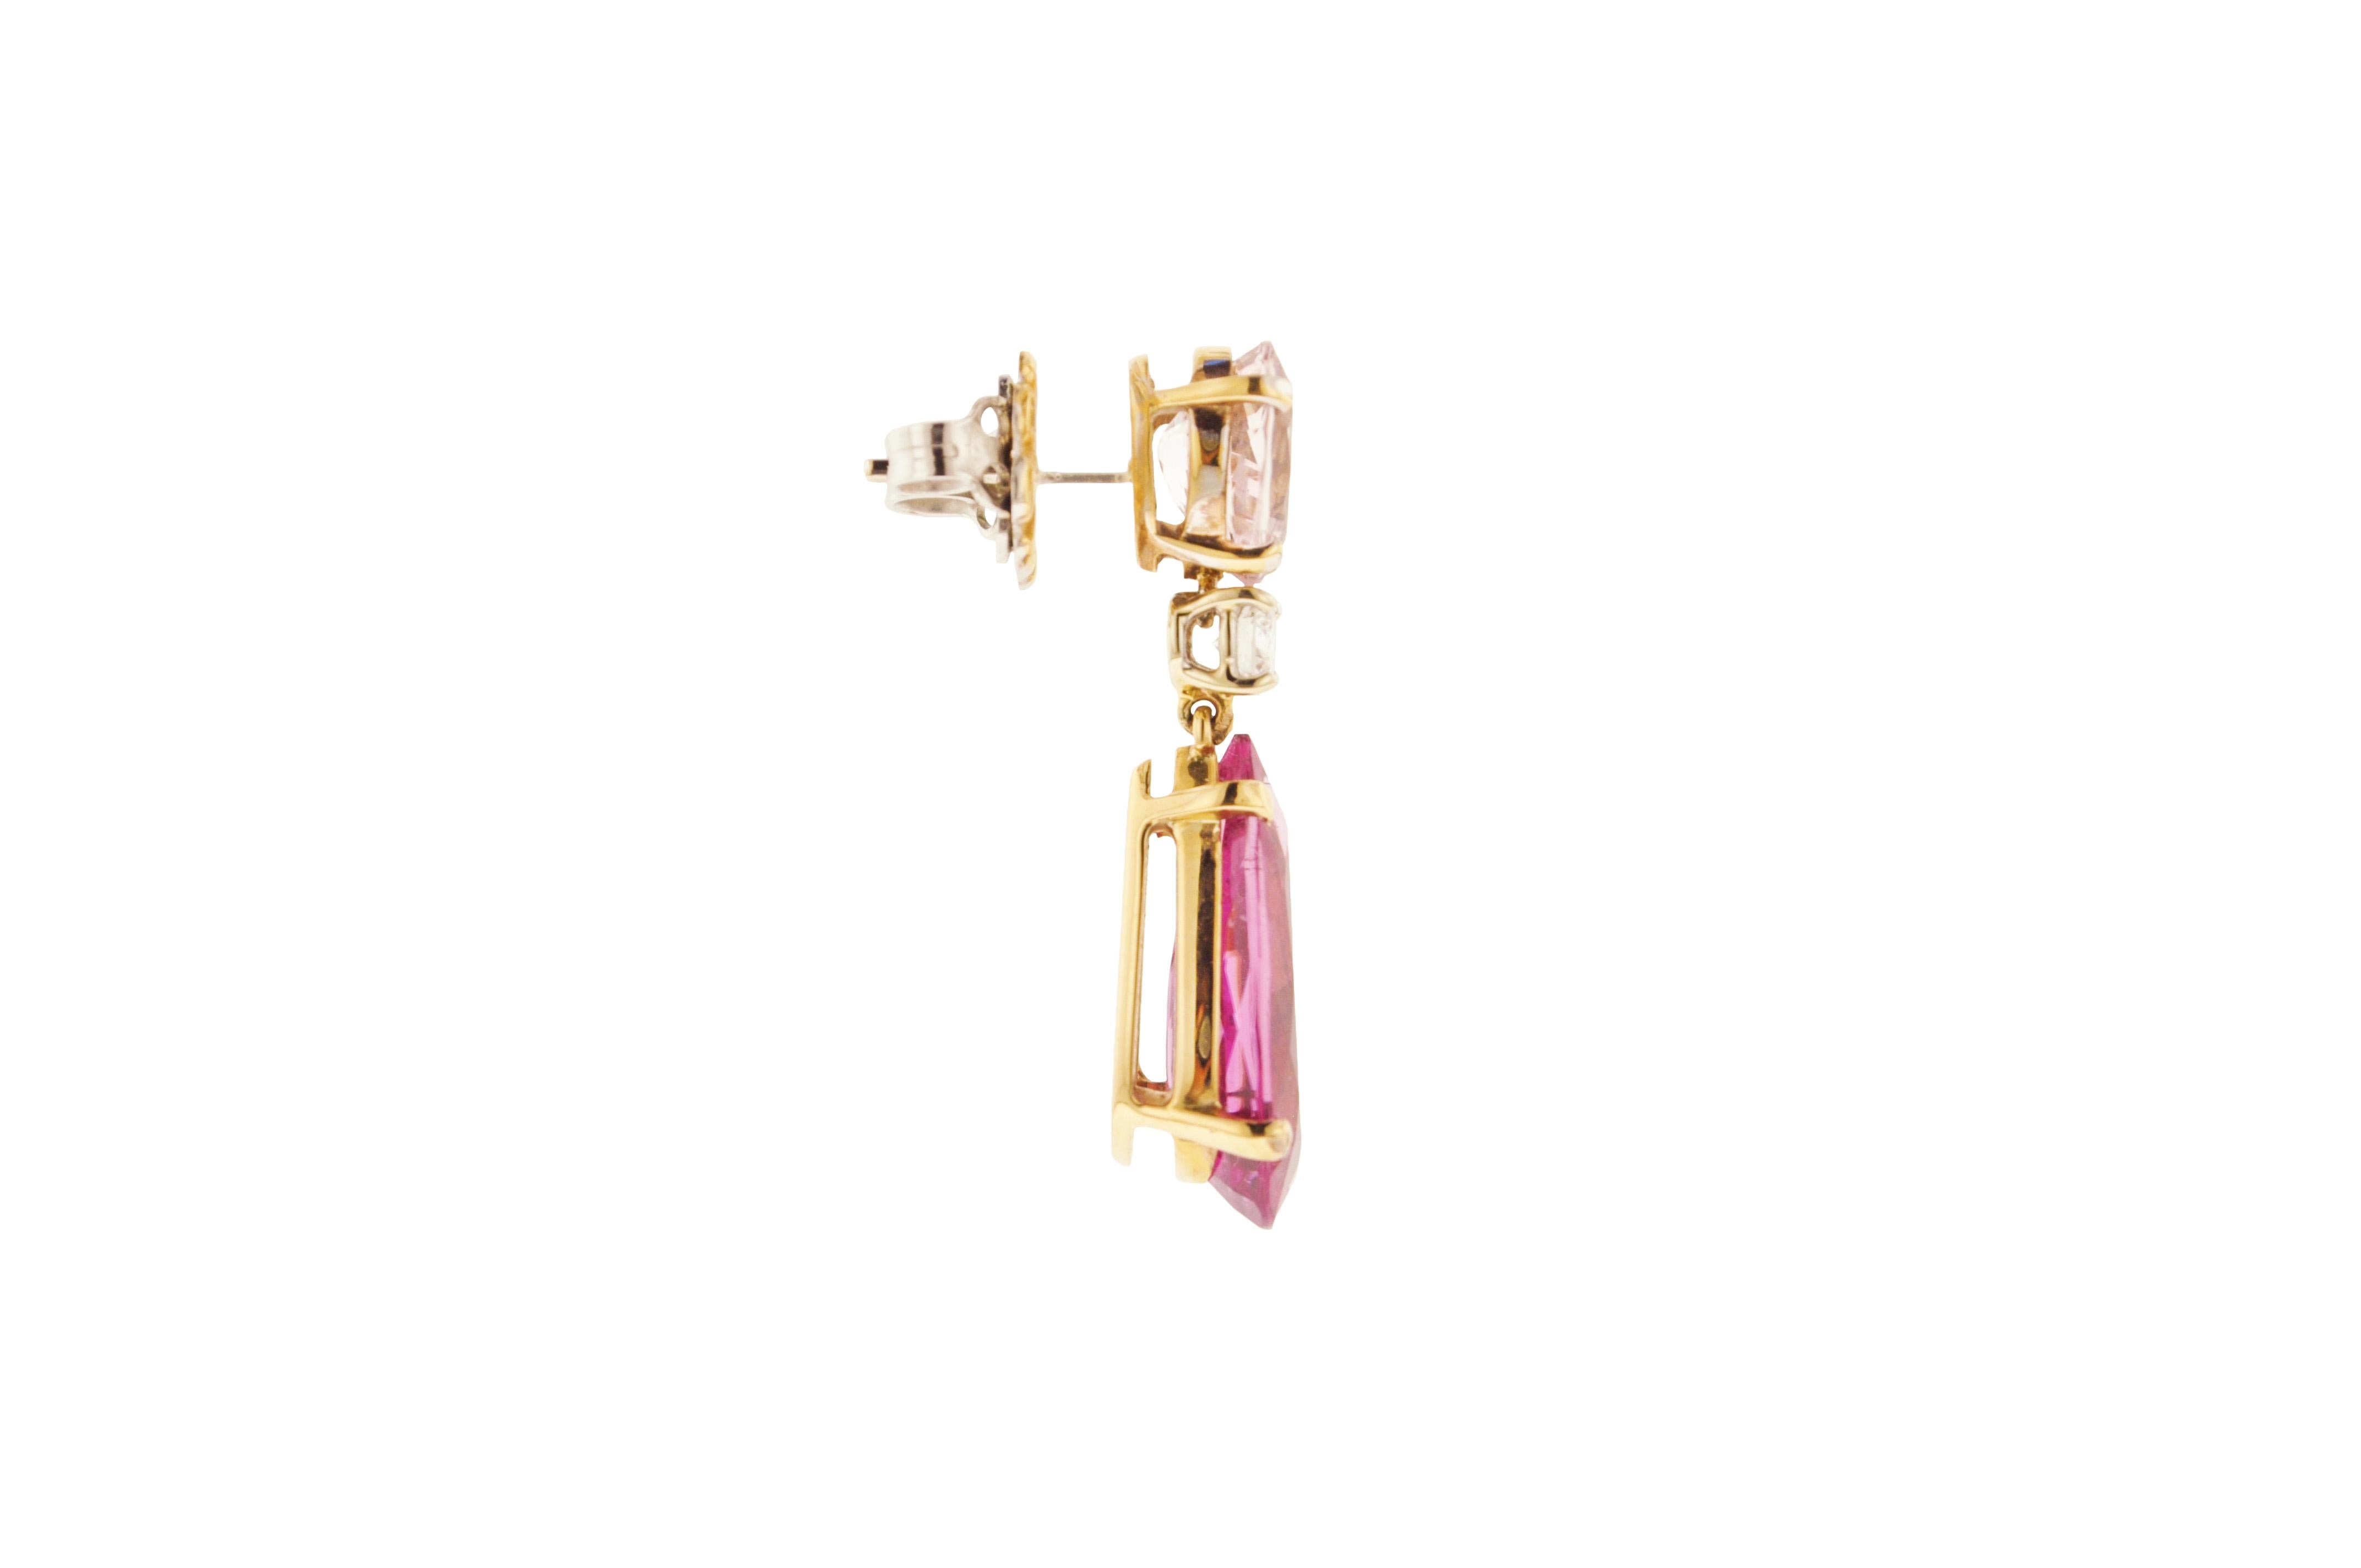 18K yellow gold earring featuring pink tourmalines, morganites, and diamonds.

Stones:
2 Pink Tourmaline: 8.95 carats
2 Morganites: 2.51 carats
2 Round White Diamonds: 0.38 carats